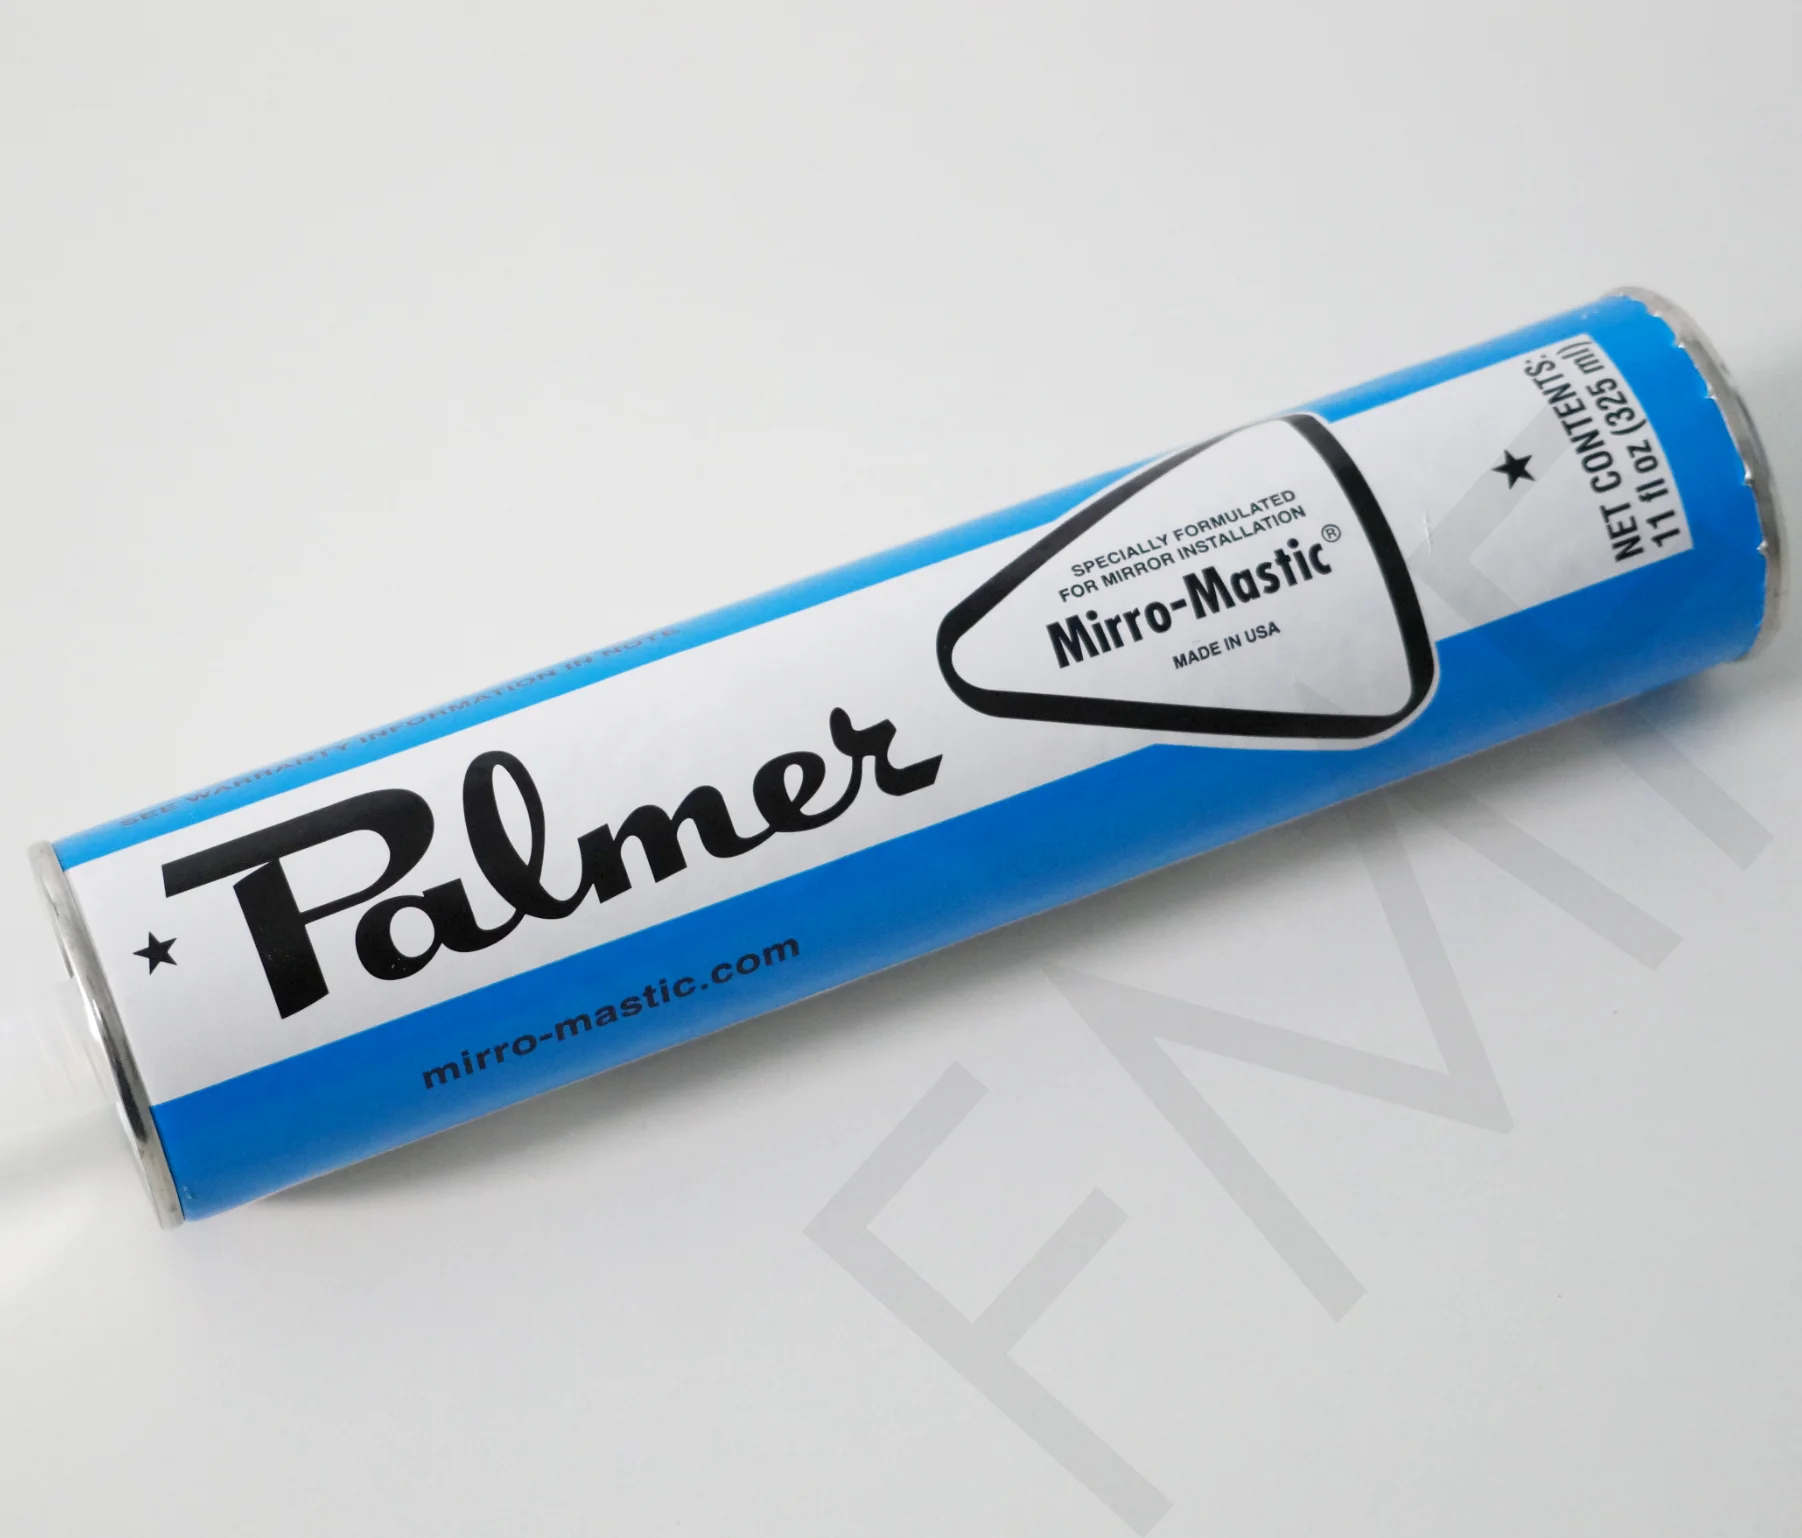 Buy Palmer Mirror-Mastic from FMF to adhere plate glass mirrors to various substrates. It is applicable to major brands of a mirror. It will allow easy installation of glass mirrors preventing any damage to mirror silvering. It is capable of absorbing normal vibration to the mirrors and encourages movement owing to the thermal changes. They are also used as an additional safety backup. It is an essential adhesive for mirror installations.